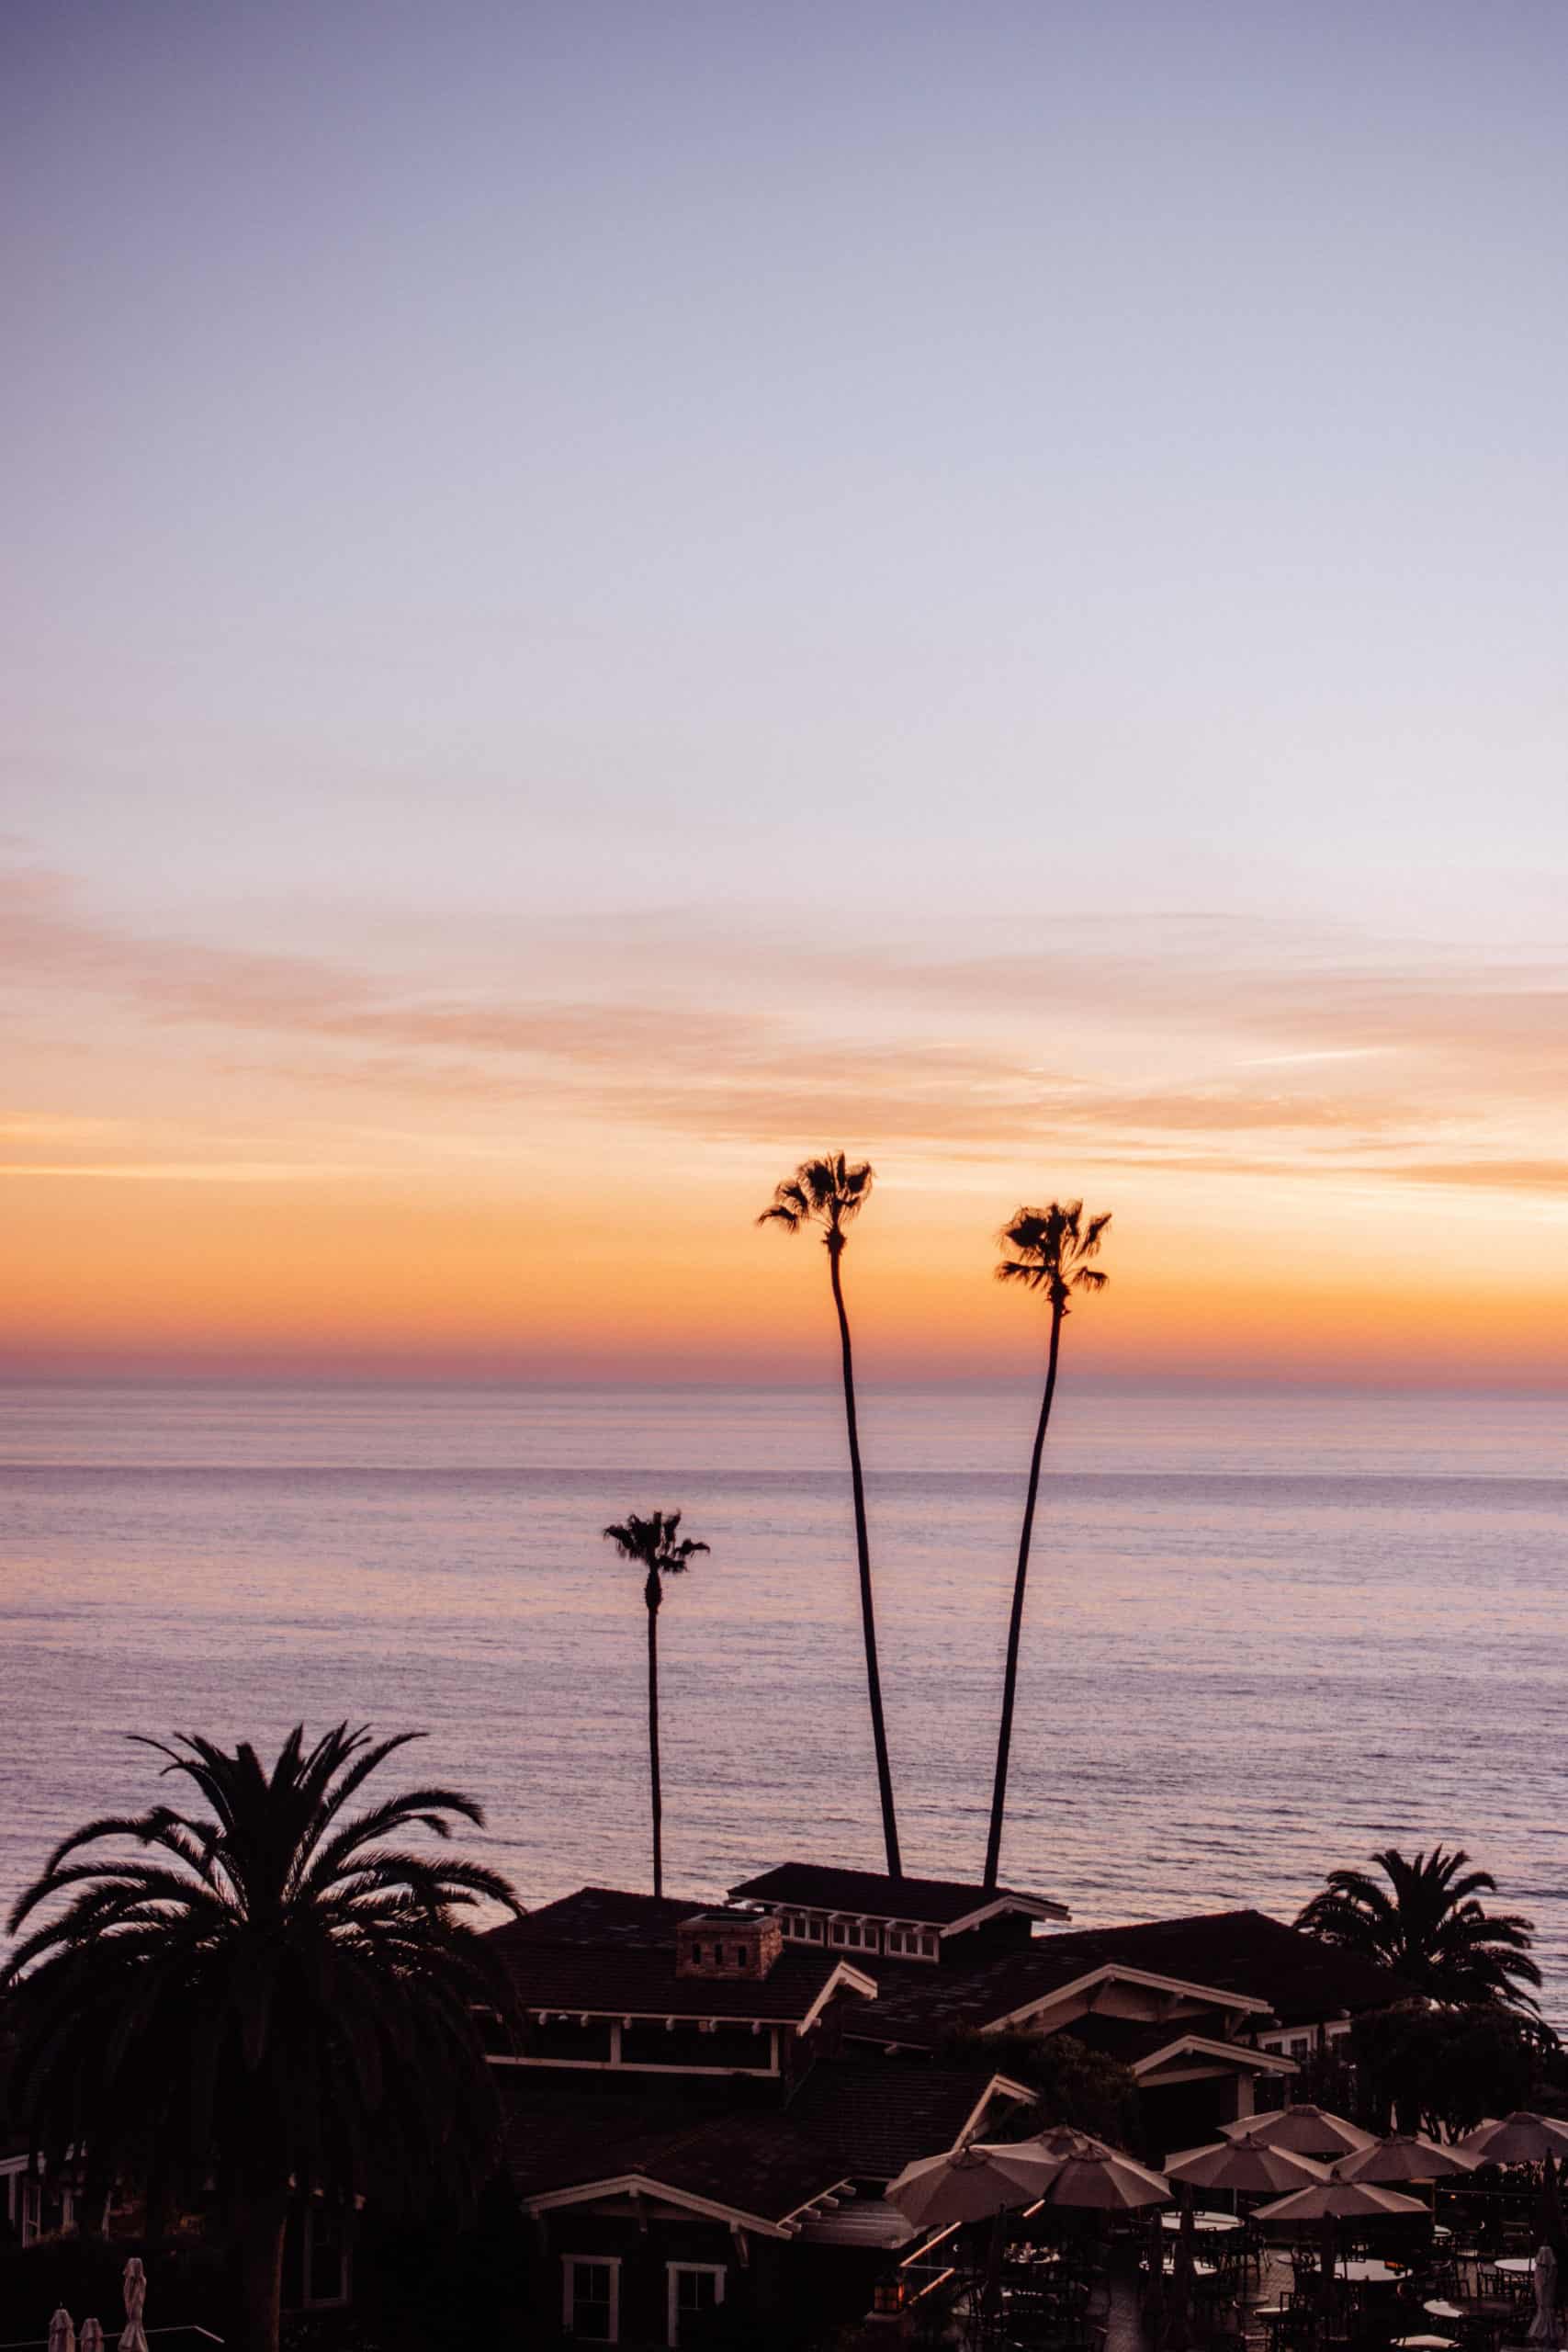 Sunset view from the Montage Laguna Beach